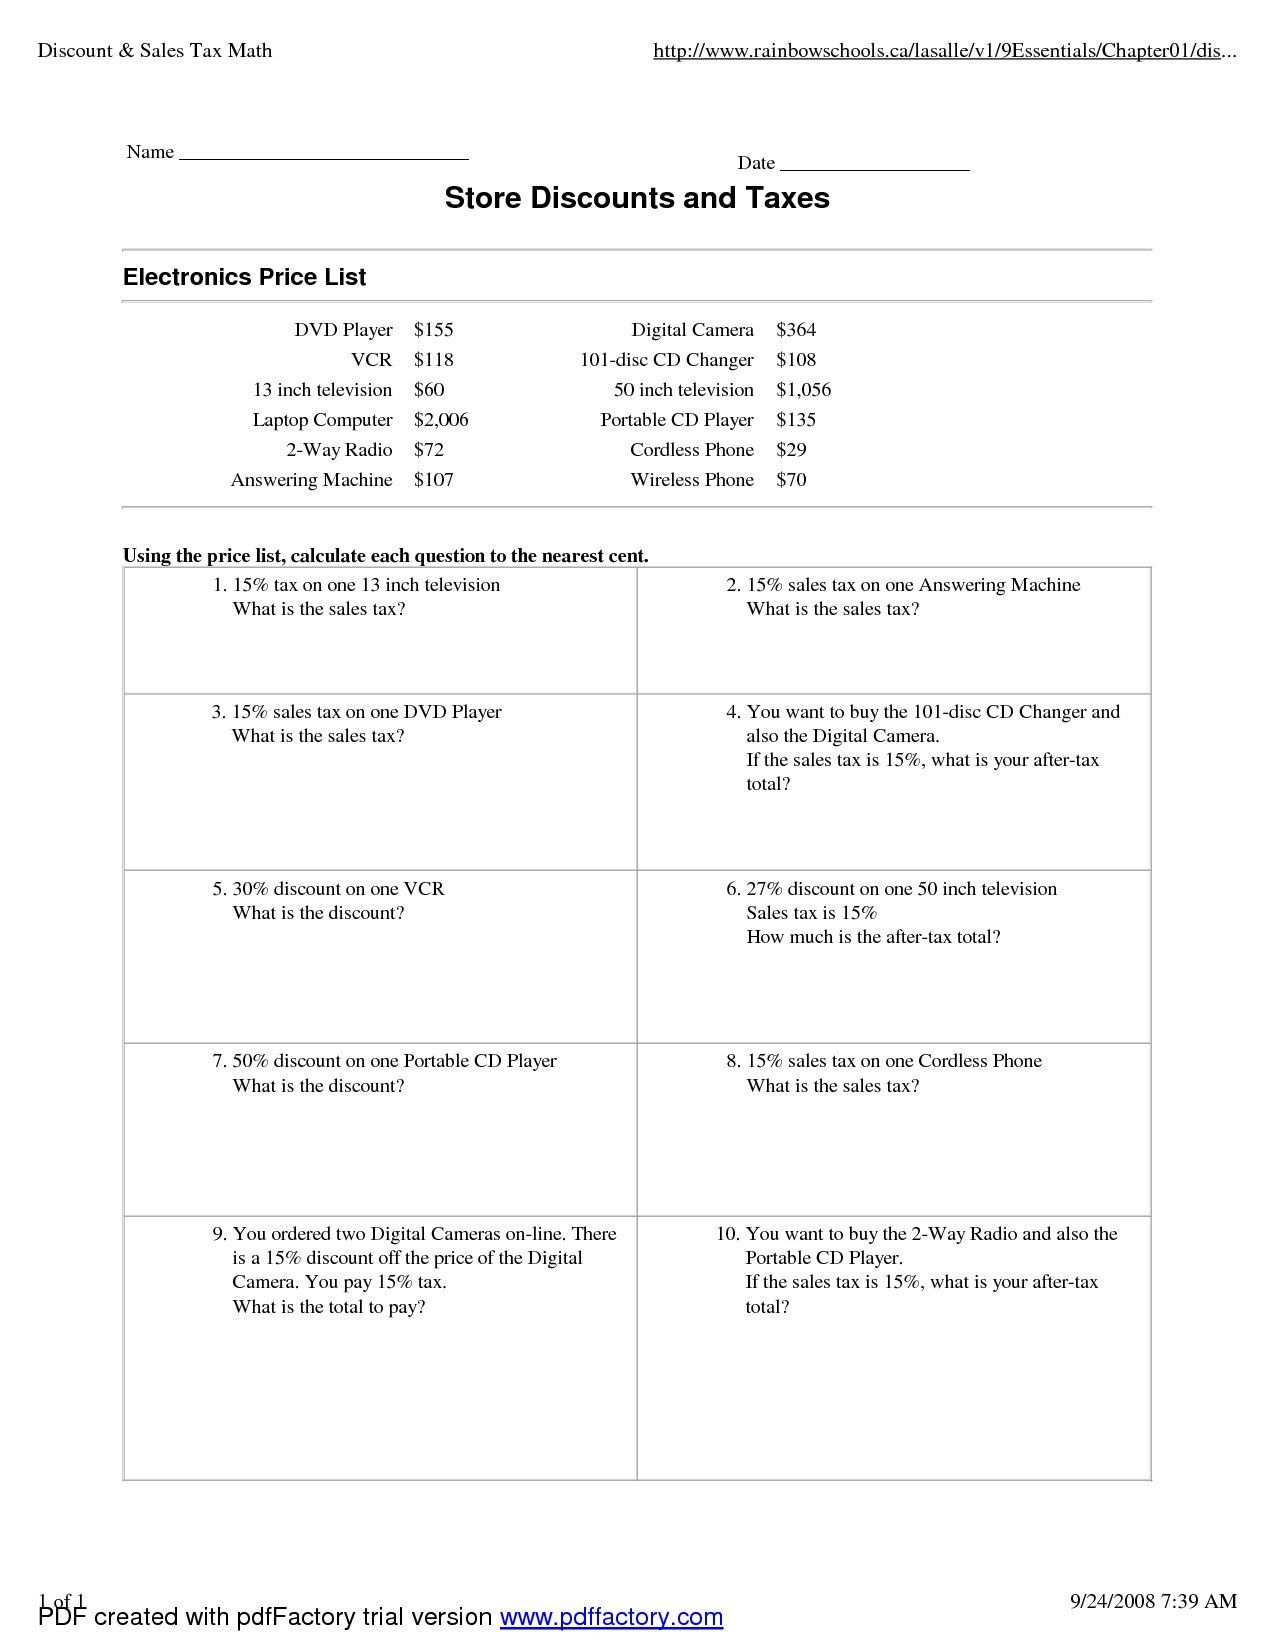 Taxation Worksheet Answers